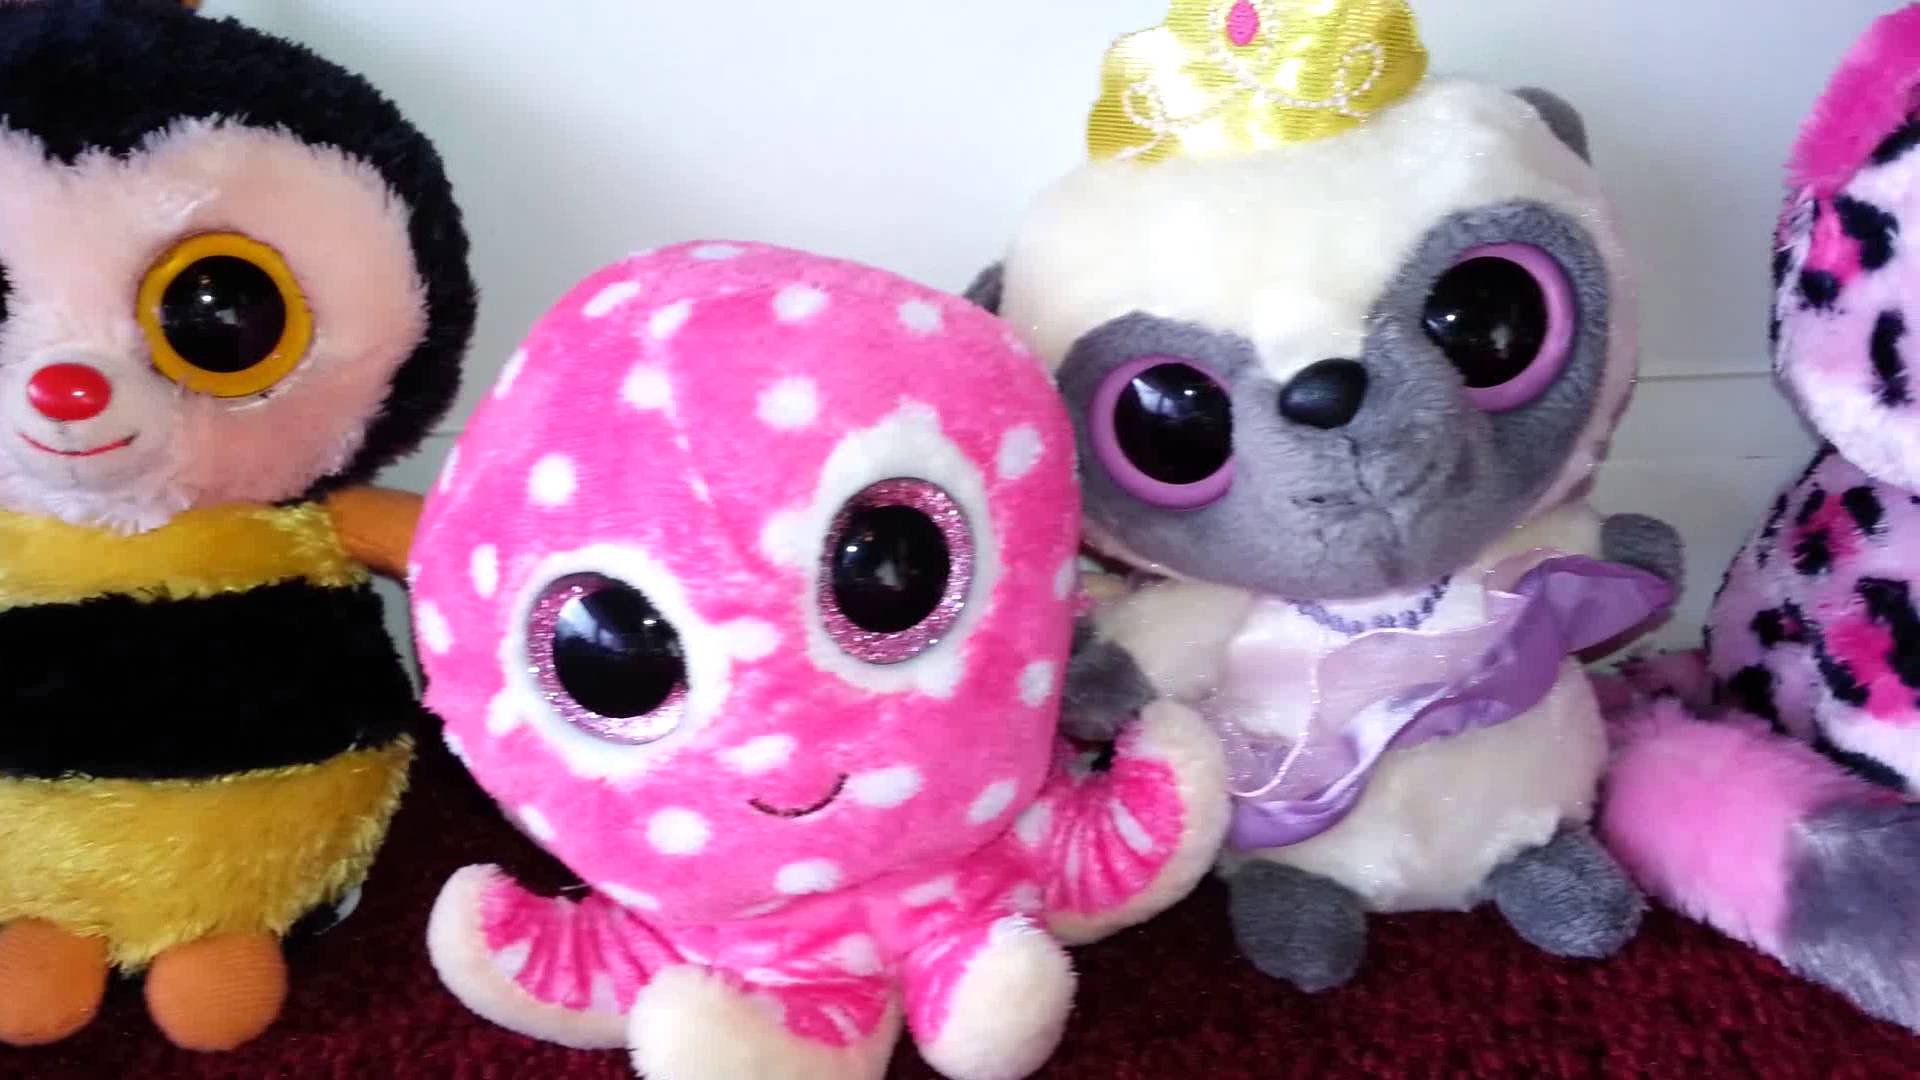 Beanie boos and counting